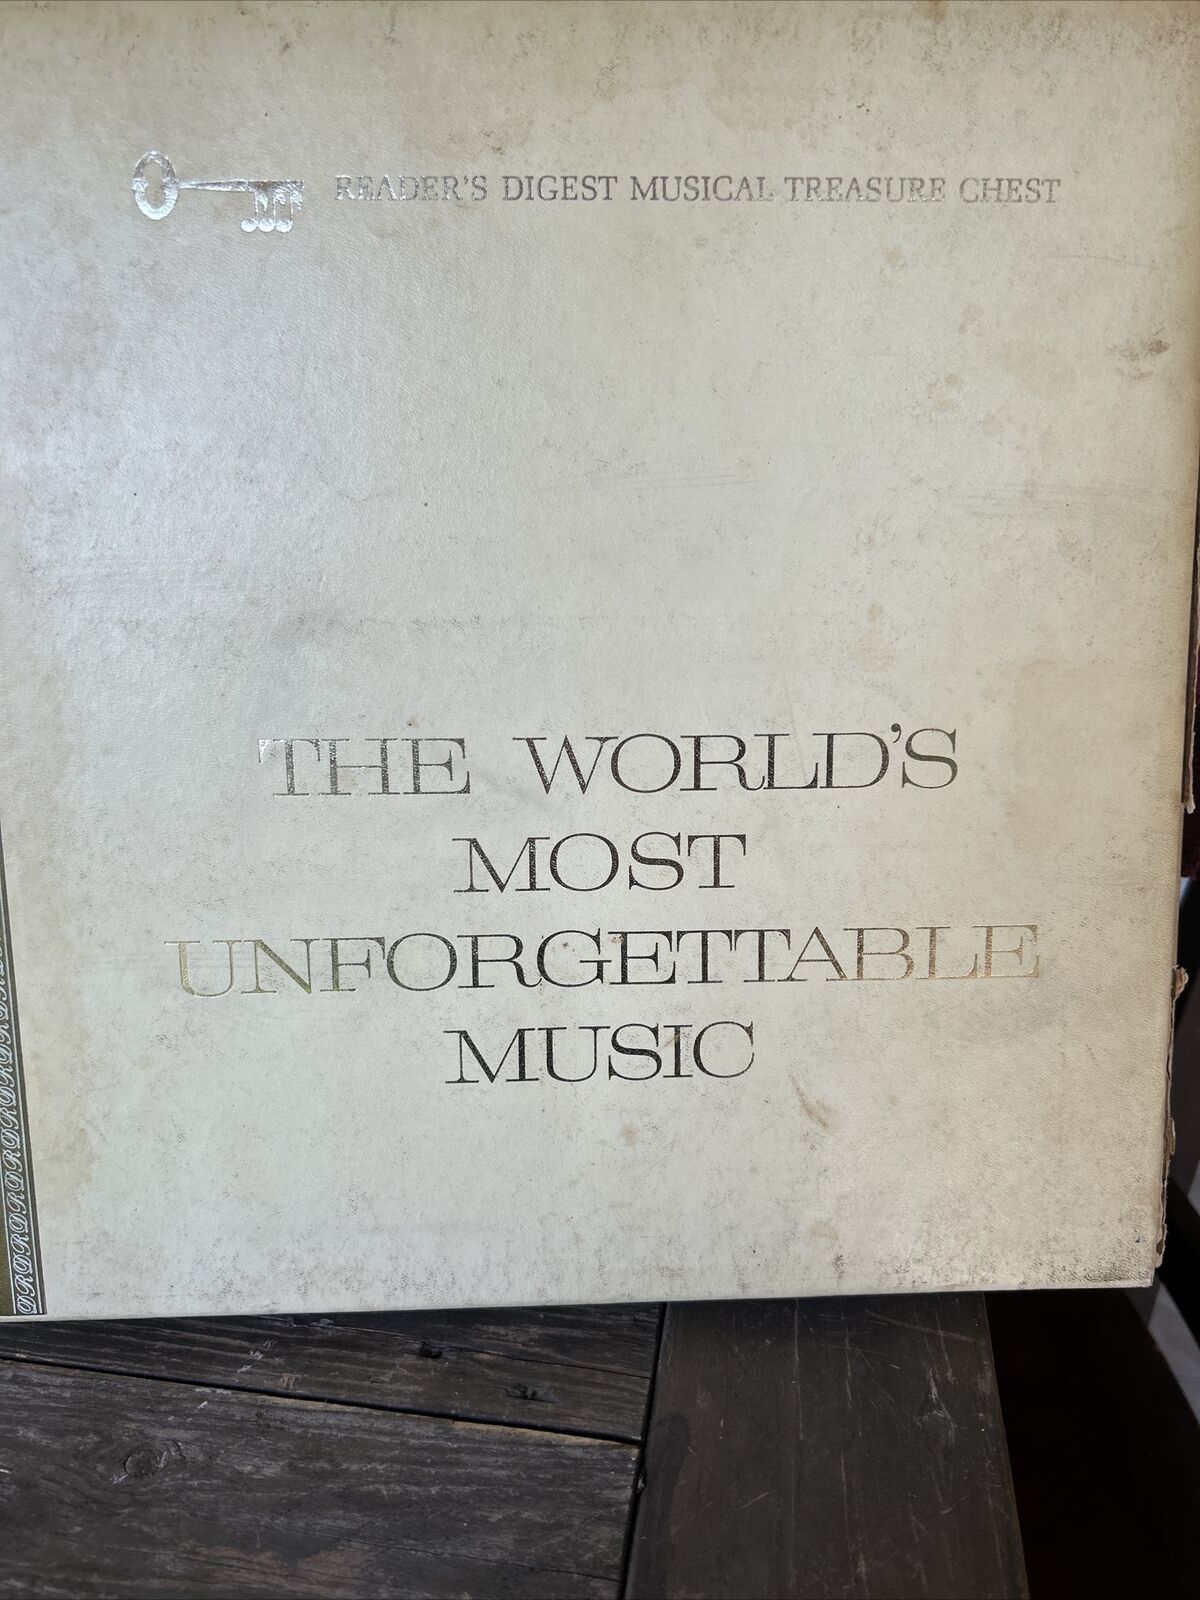 1960s Reader Digest Musical Treasure Chest, The World’s Most Unforgettable Music